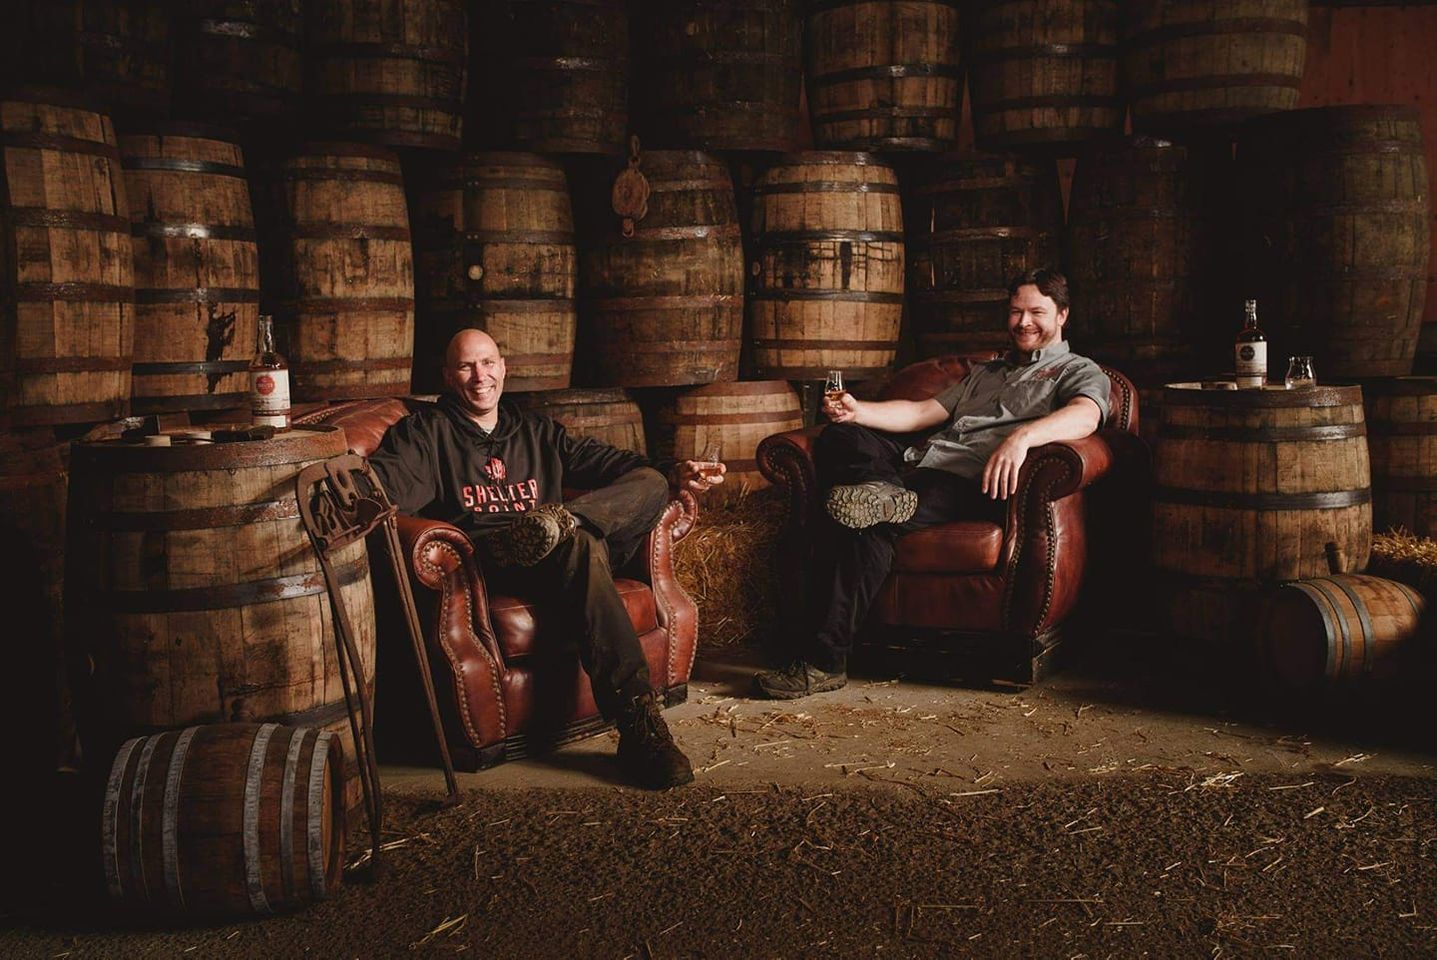 Owners of Shelter Point Distillery sitting on arm chairs in their distillery surrounded by whisky barrels and whisky glasses in hand